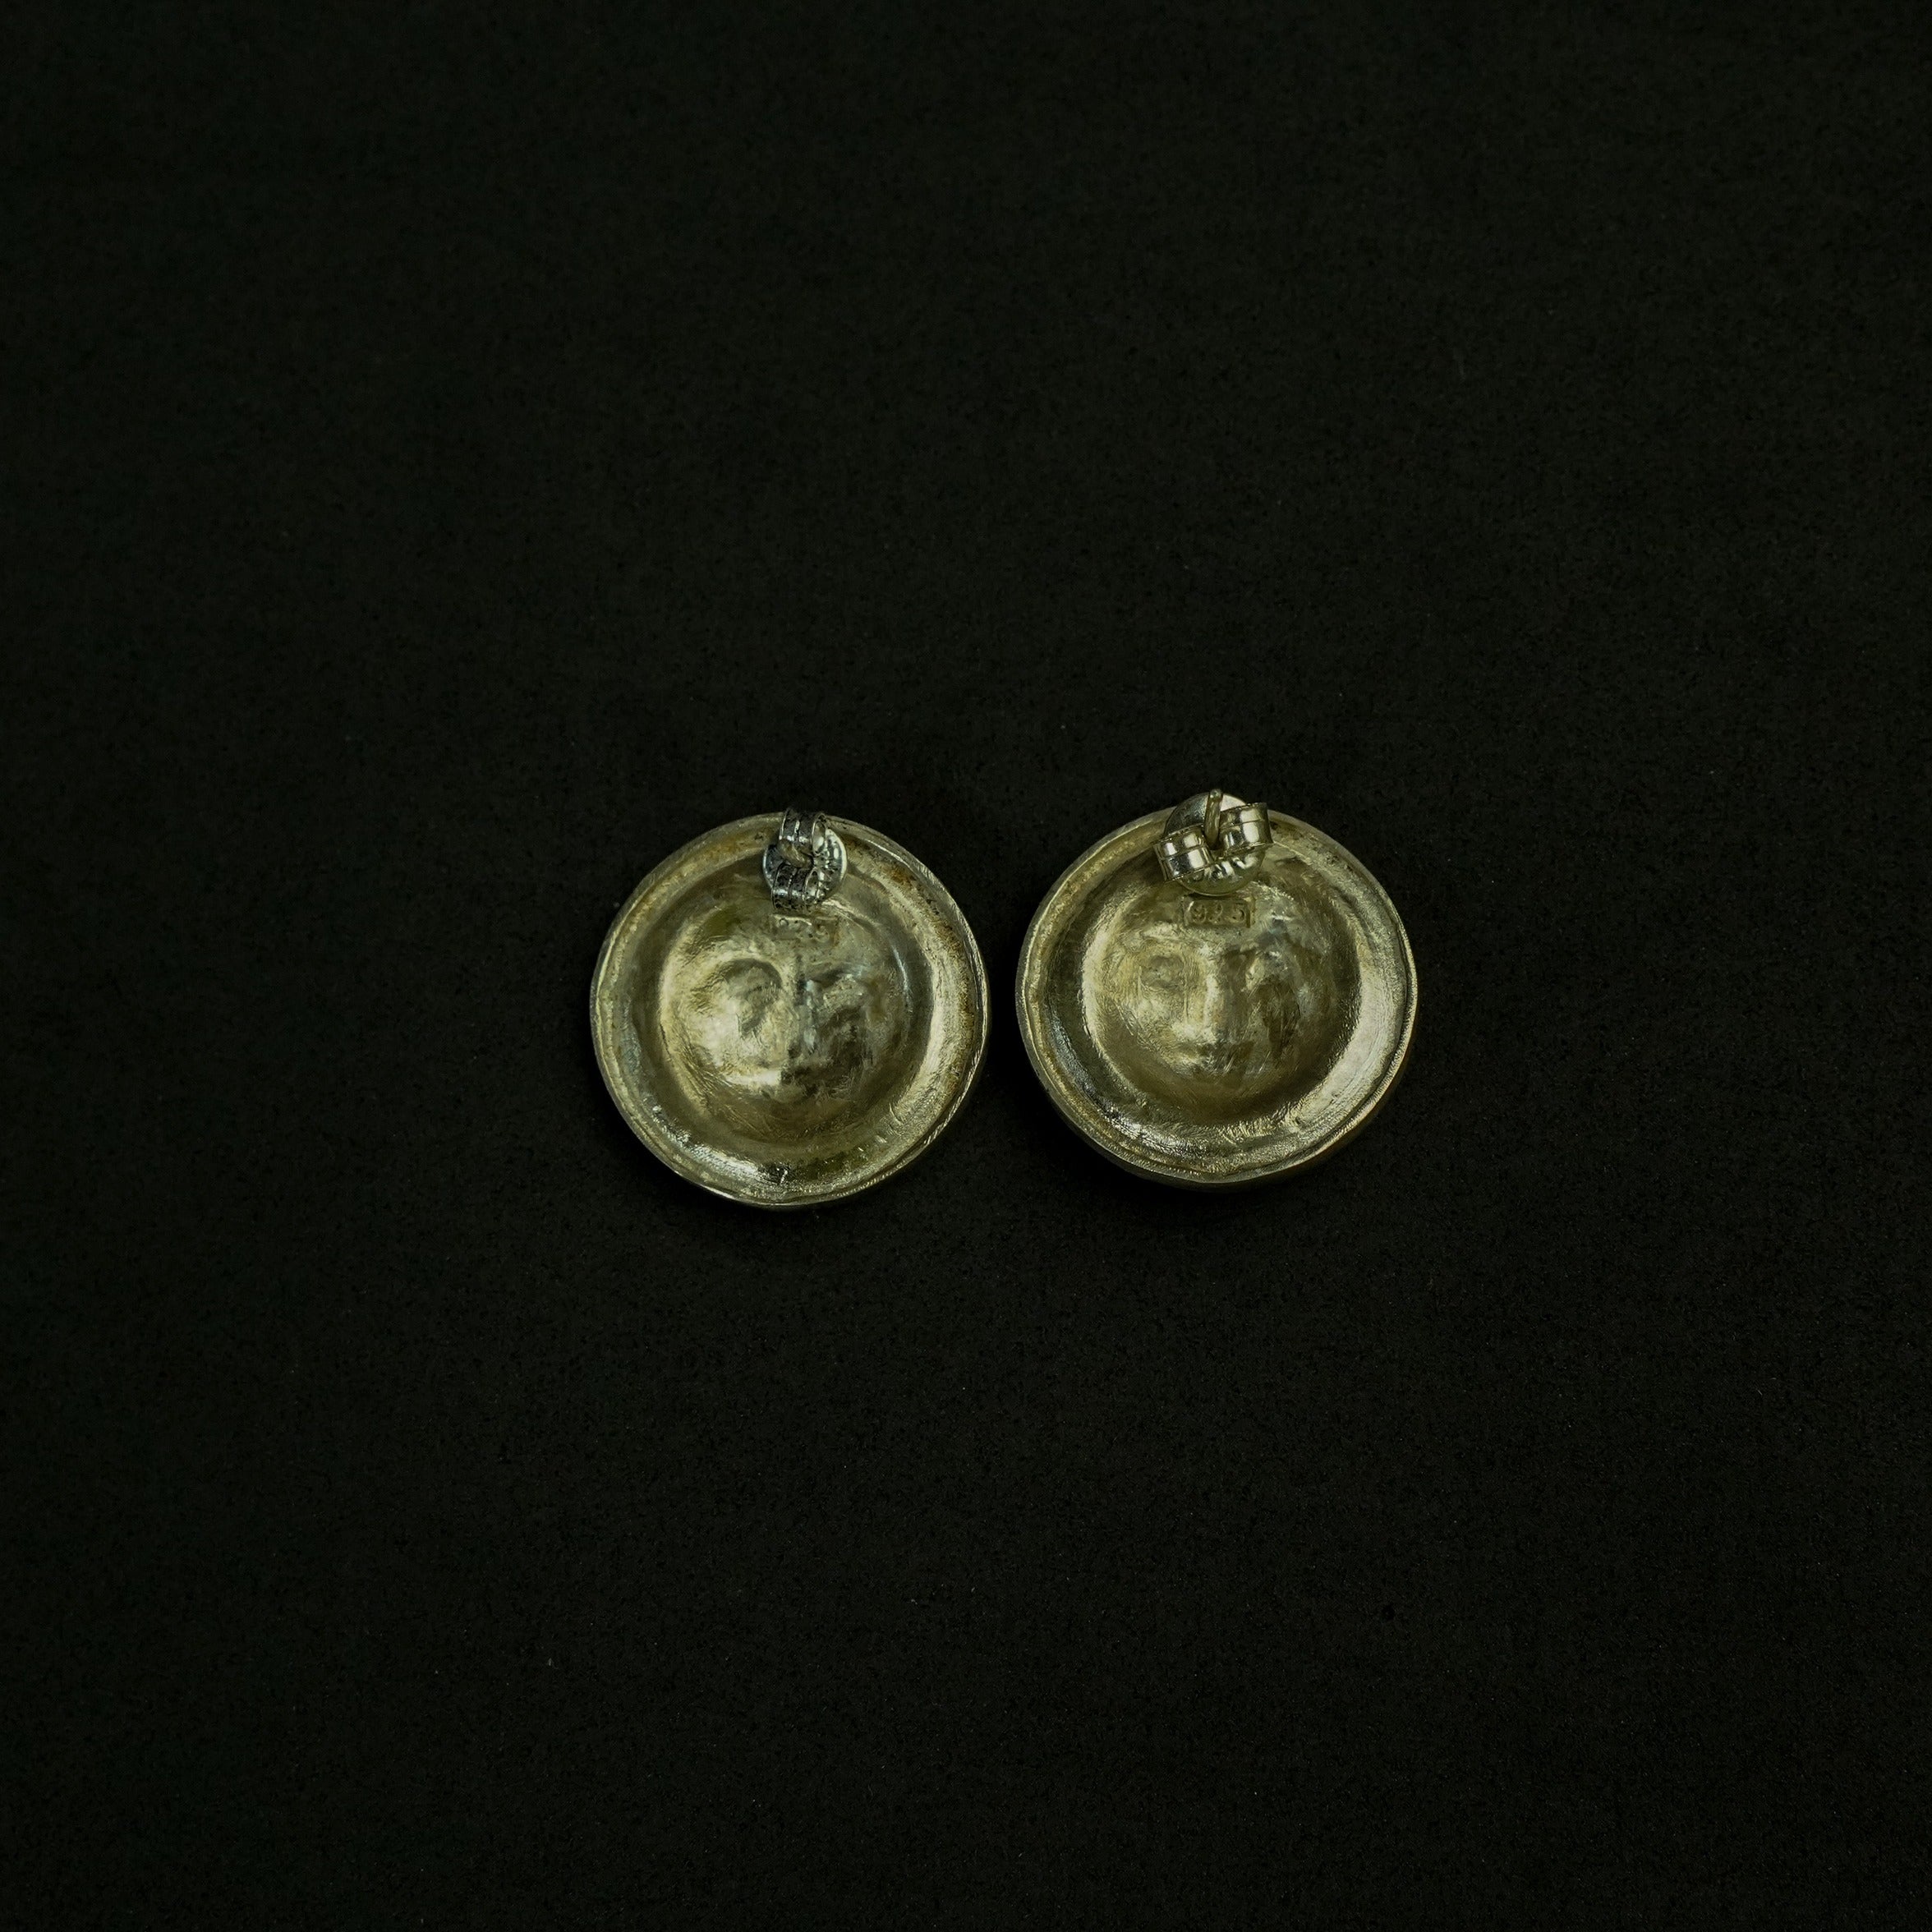 Quirksmith's Handcrafted Chandramukhi Studs – Sterling Silver Set of Elegant Earstuds"